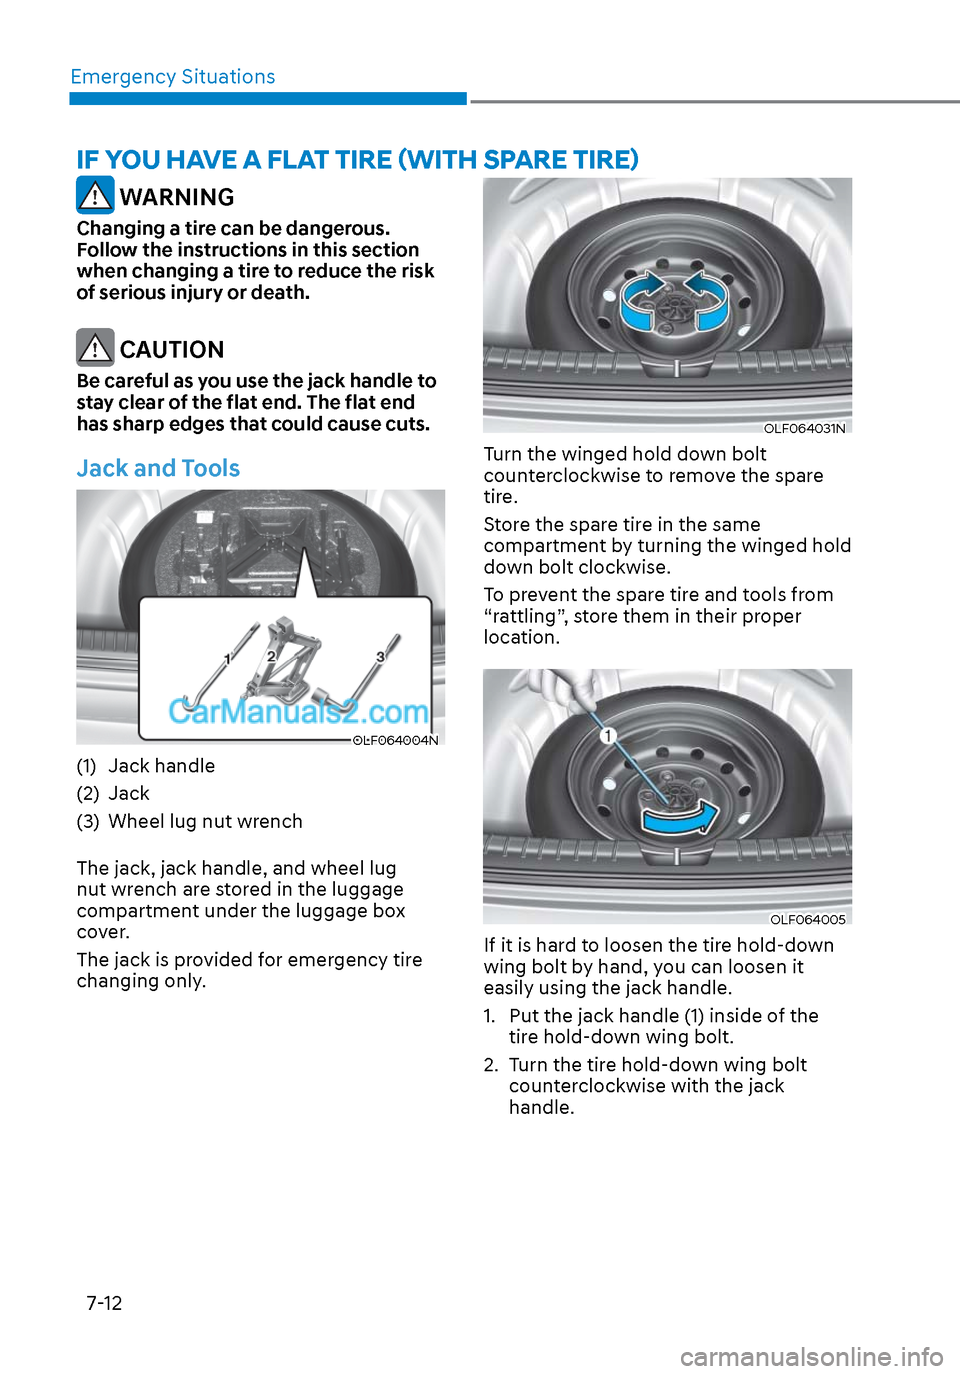 Hyundai Sonata 2020  Owners Manual Emergency Situations7-12
IF YOU HAVE A FLAT TIRE (WITH SPARE TIRE)
 WARNING
Changing a tire can be dangerous. 
Follow the instructions in this section 
when changing a tire to reduce the risk 
of seri